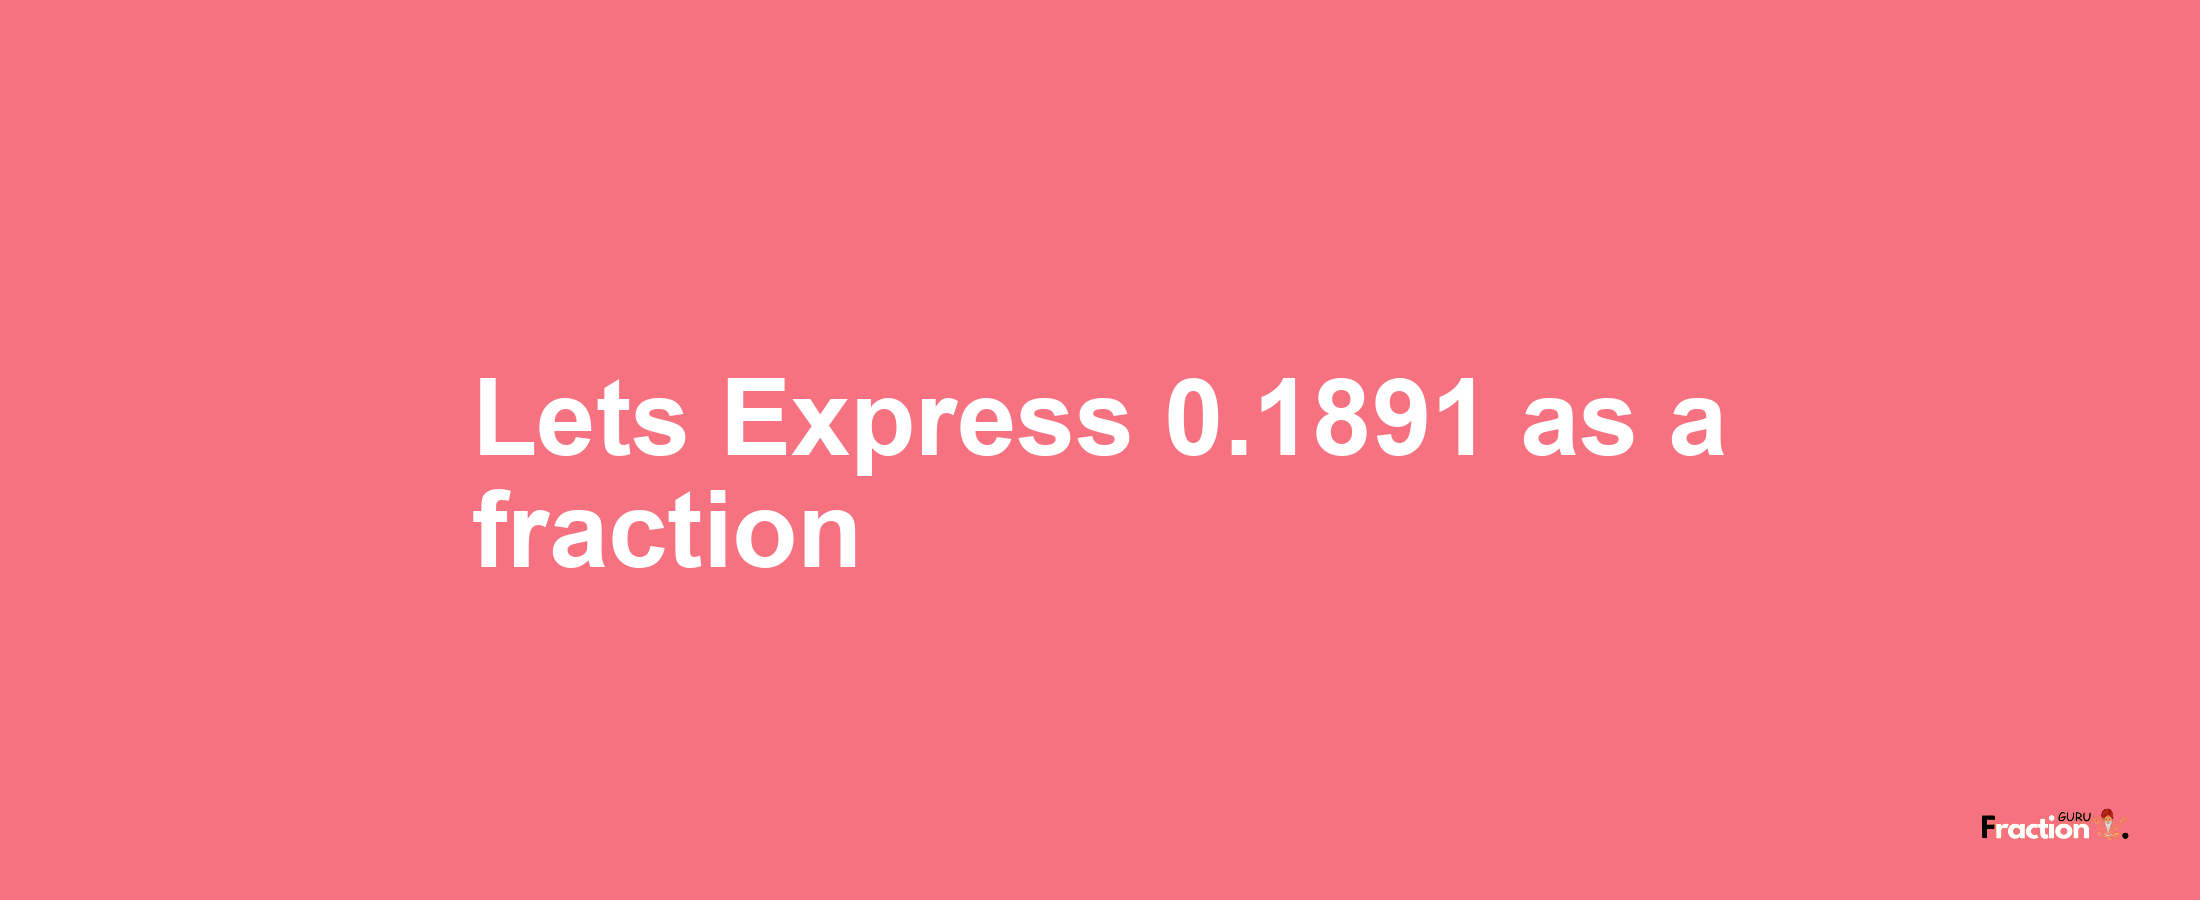 Lets Express 0.1891 as afraction